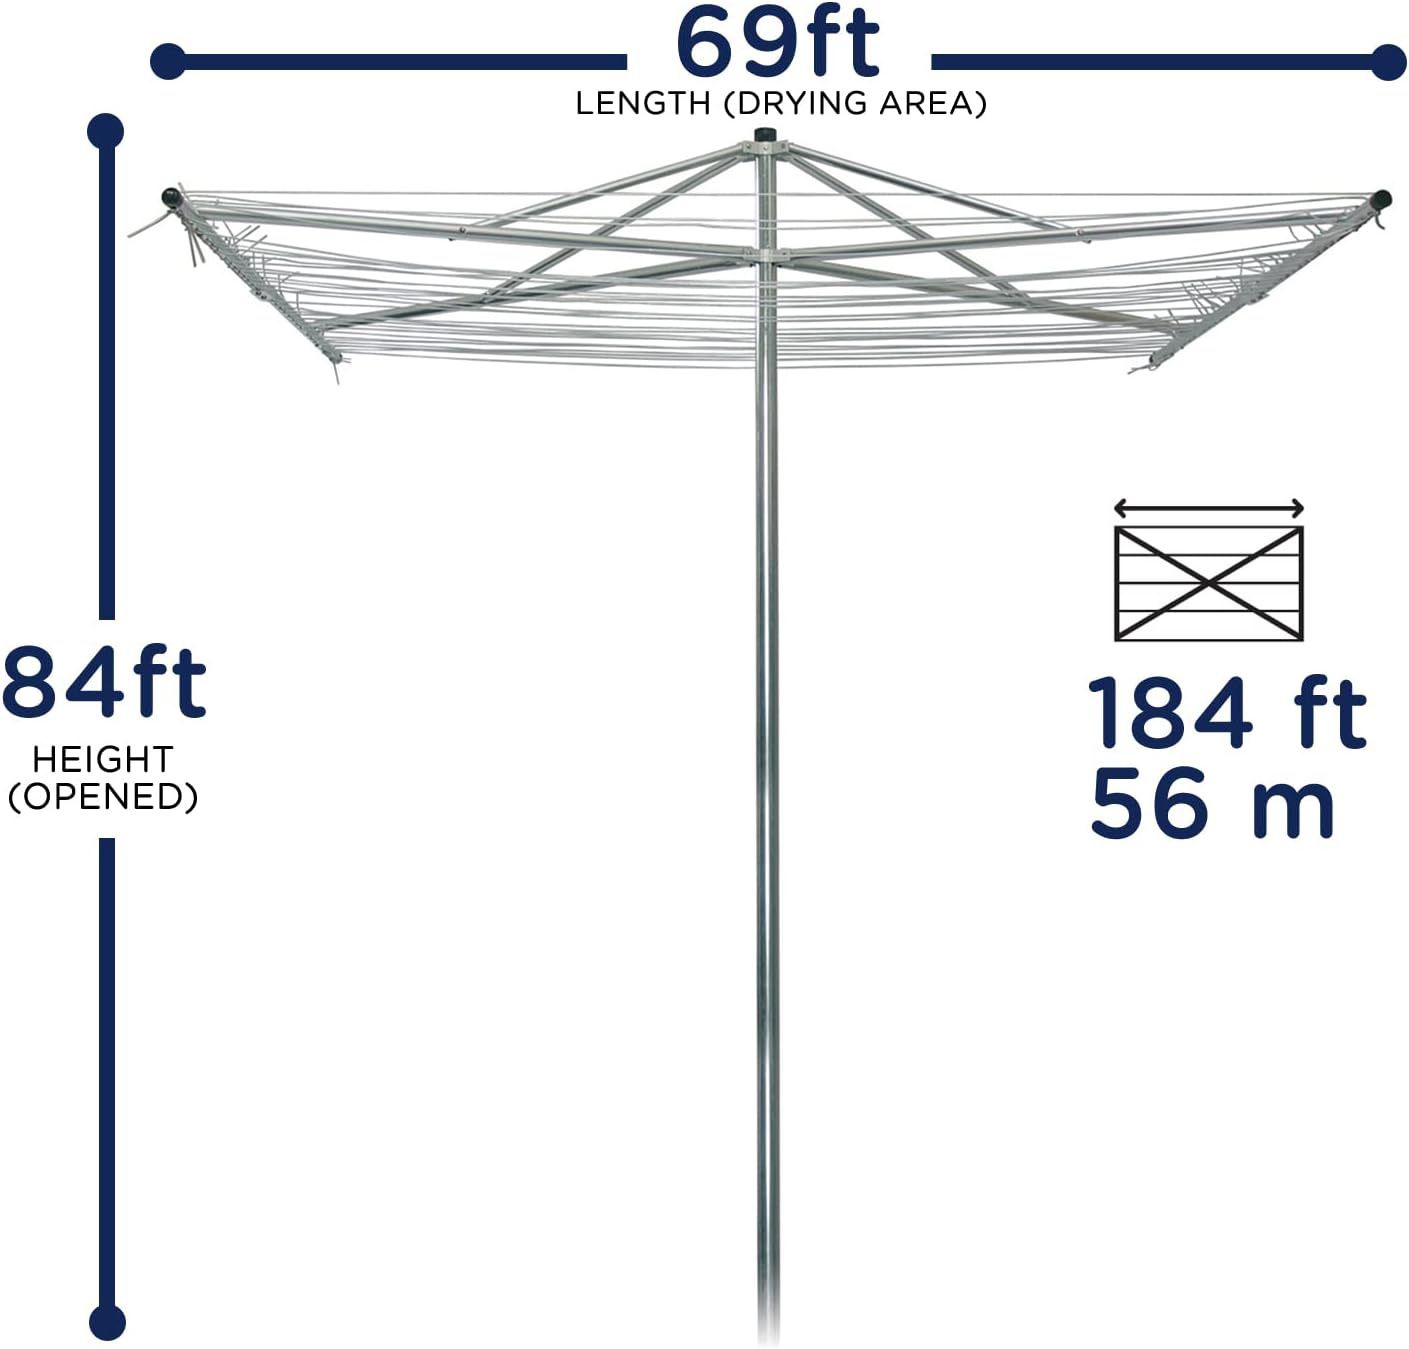 Strata Heavy Duty Parallel Rotary Outdoor Drying Rack - 184 Feet Umbrella Clothesline Dryer, Aluminum & Steel Frame Outside Clothes Drying Rack, Silve - Selzalot